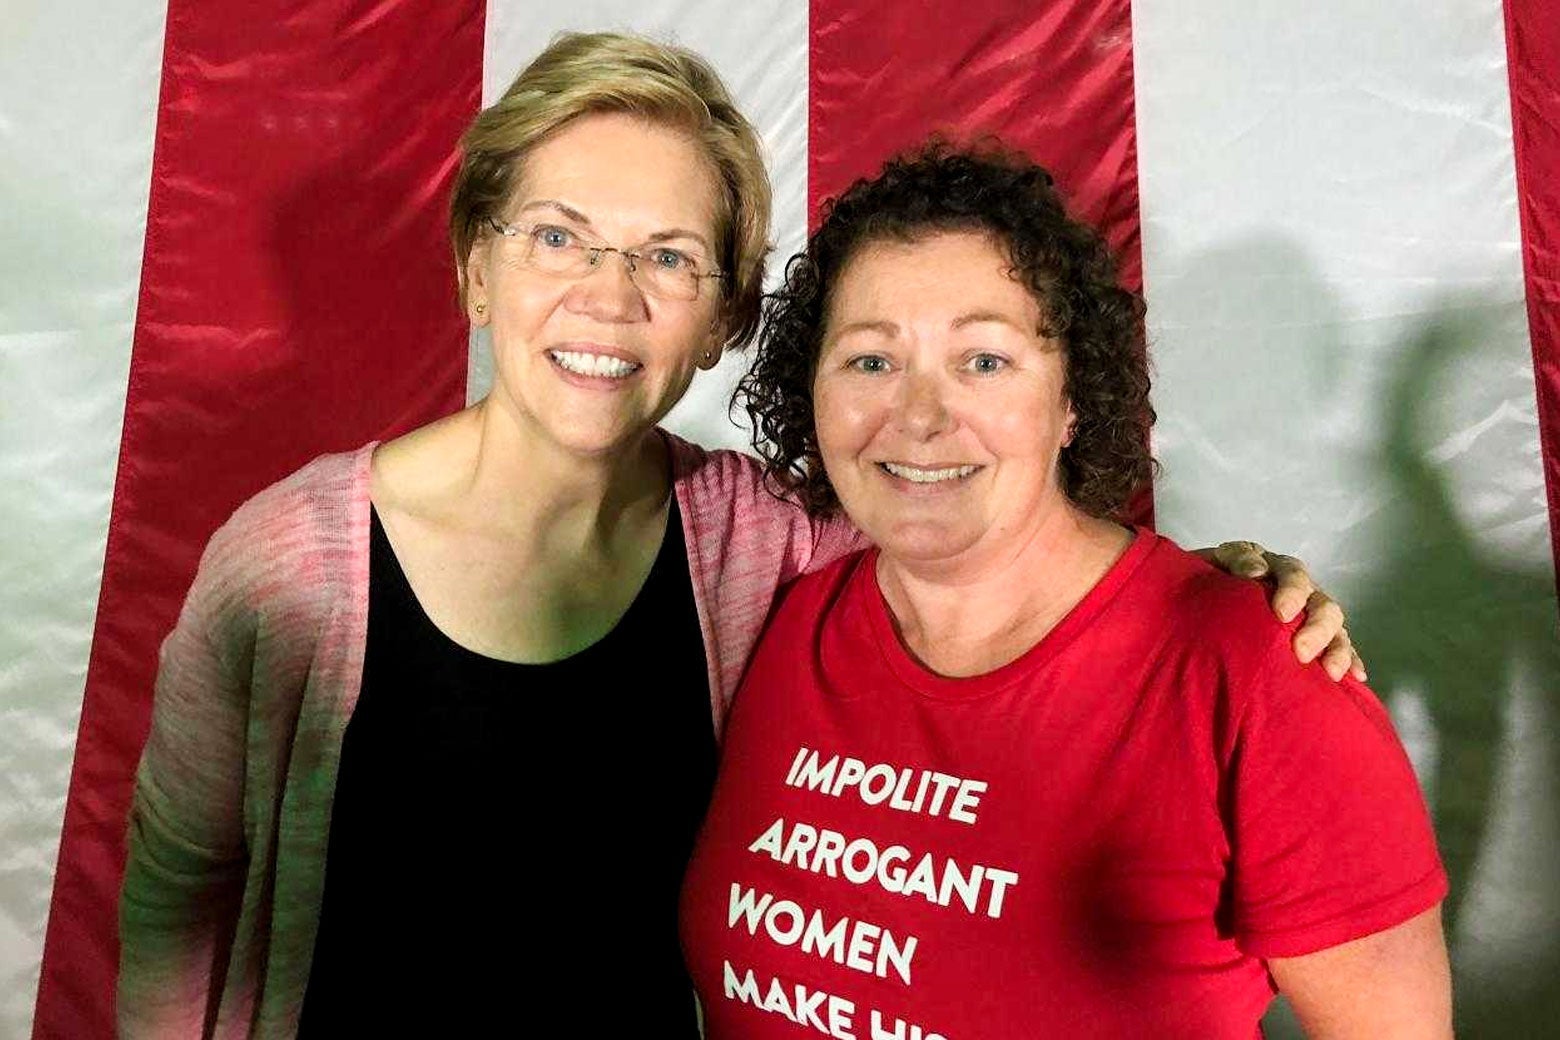 Elizabeth Warren and Mia Pinto pose in front of an American flag.